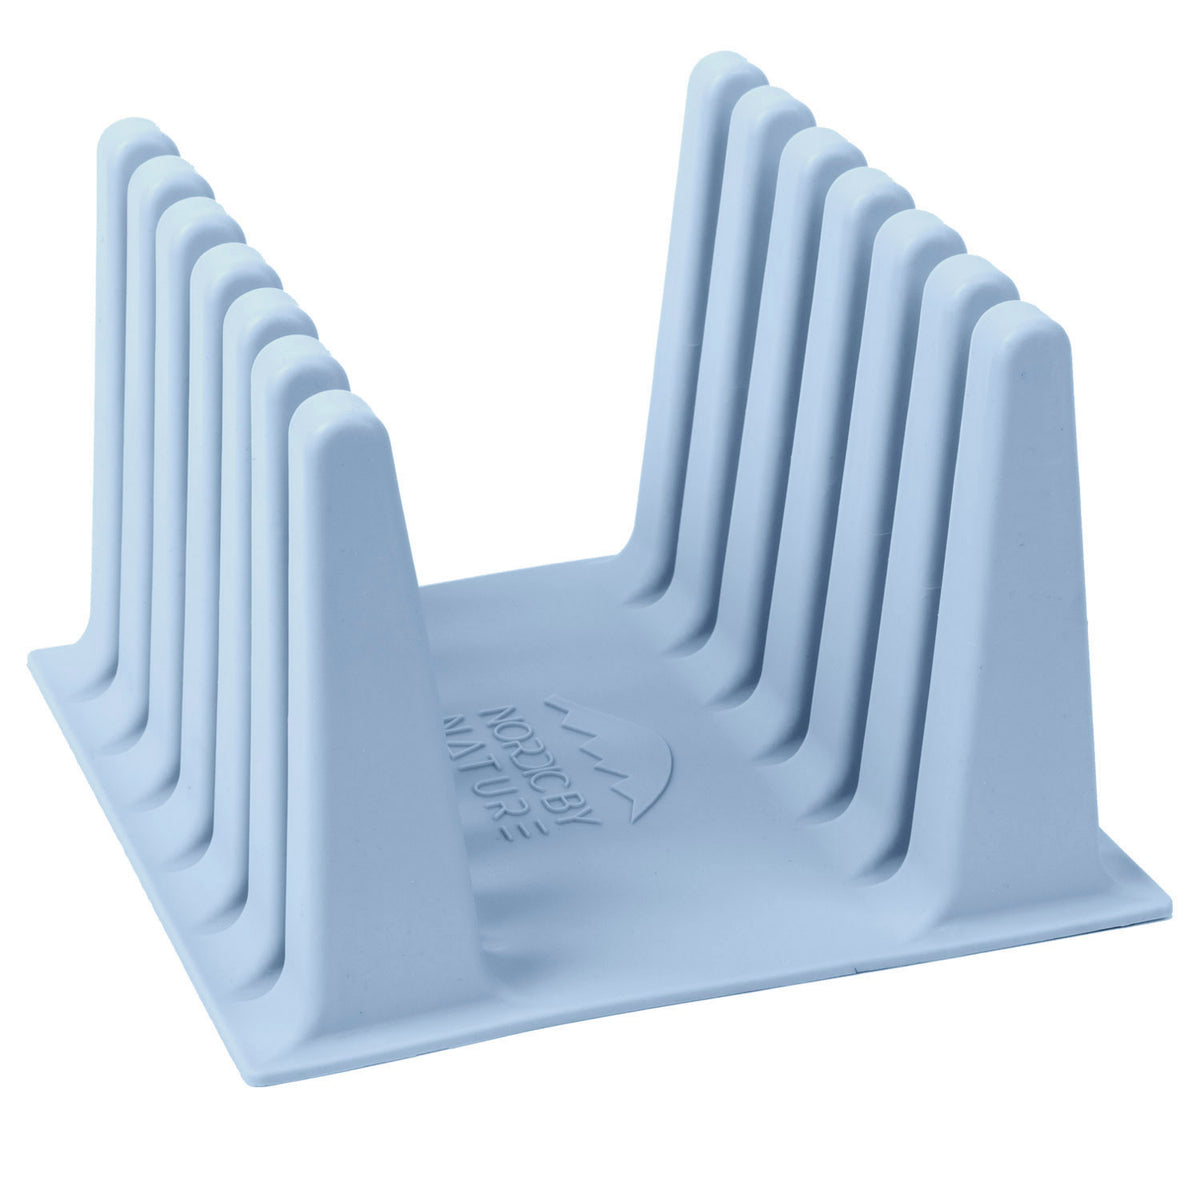 Nordic By Nature Silicone Drying Rack For Reusable Bags - Nordic Blue –  Life Of Leisure, LLC Nordic By Nature Brand